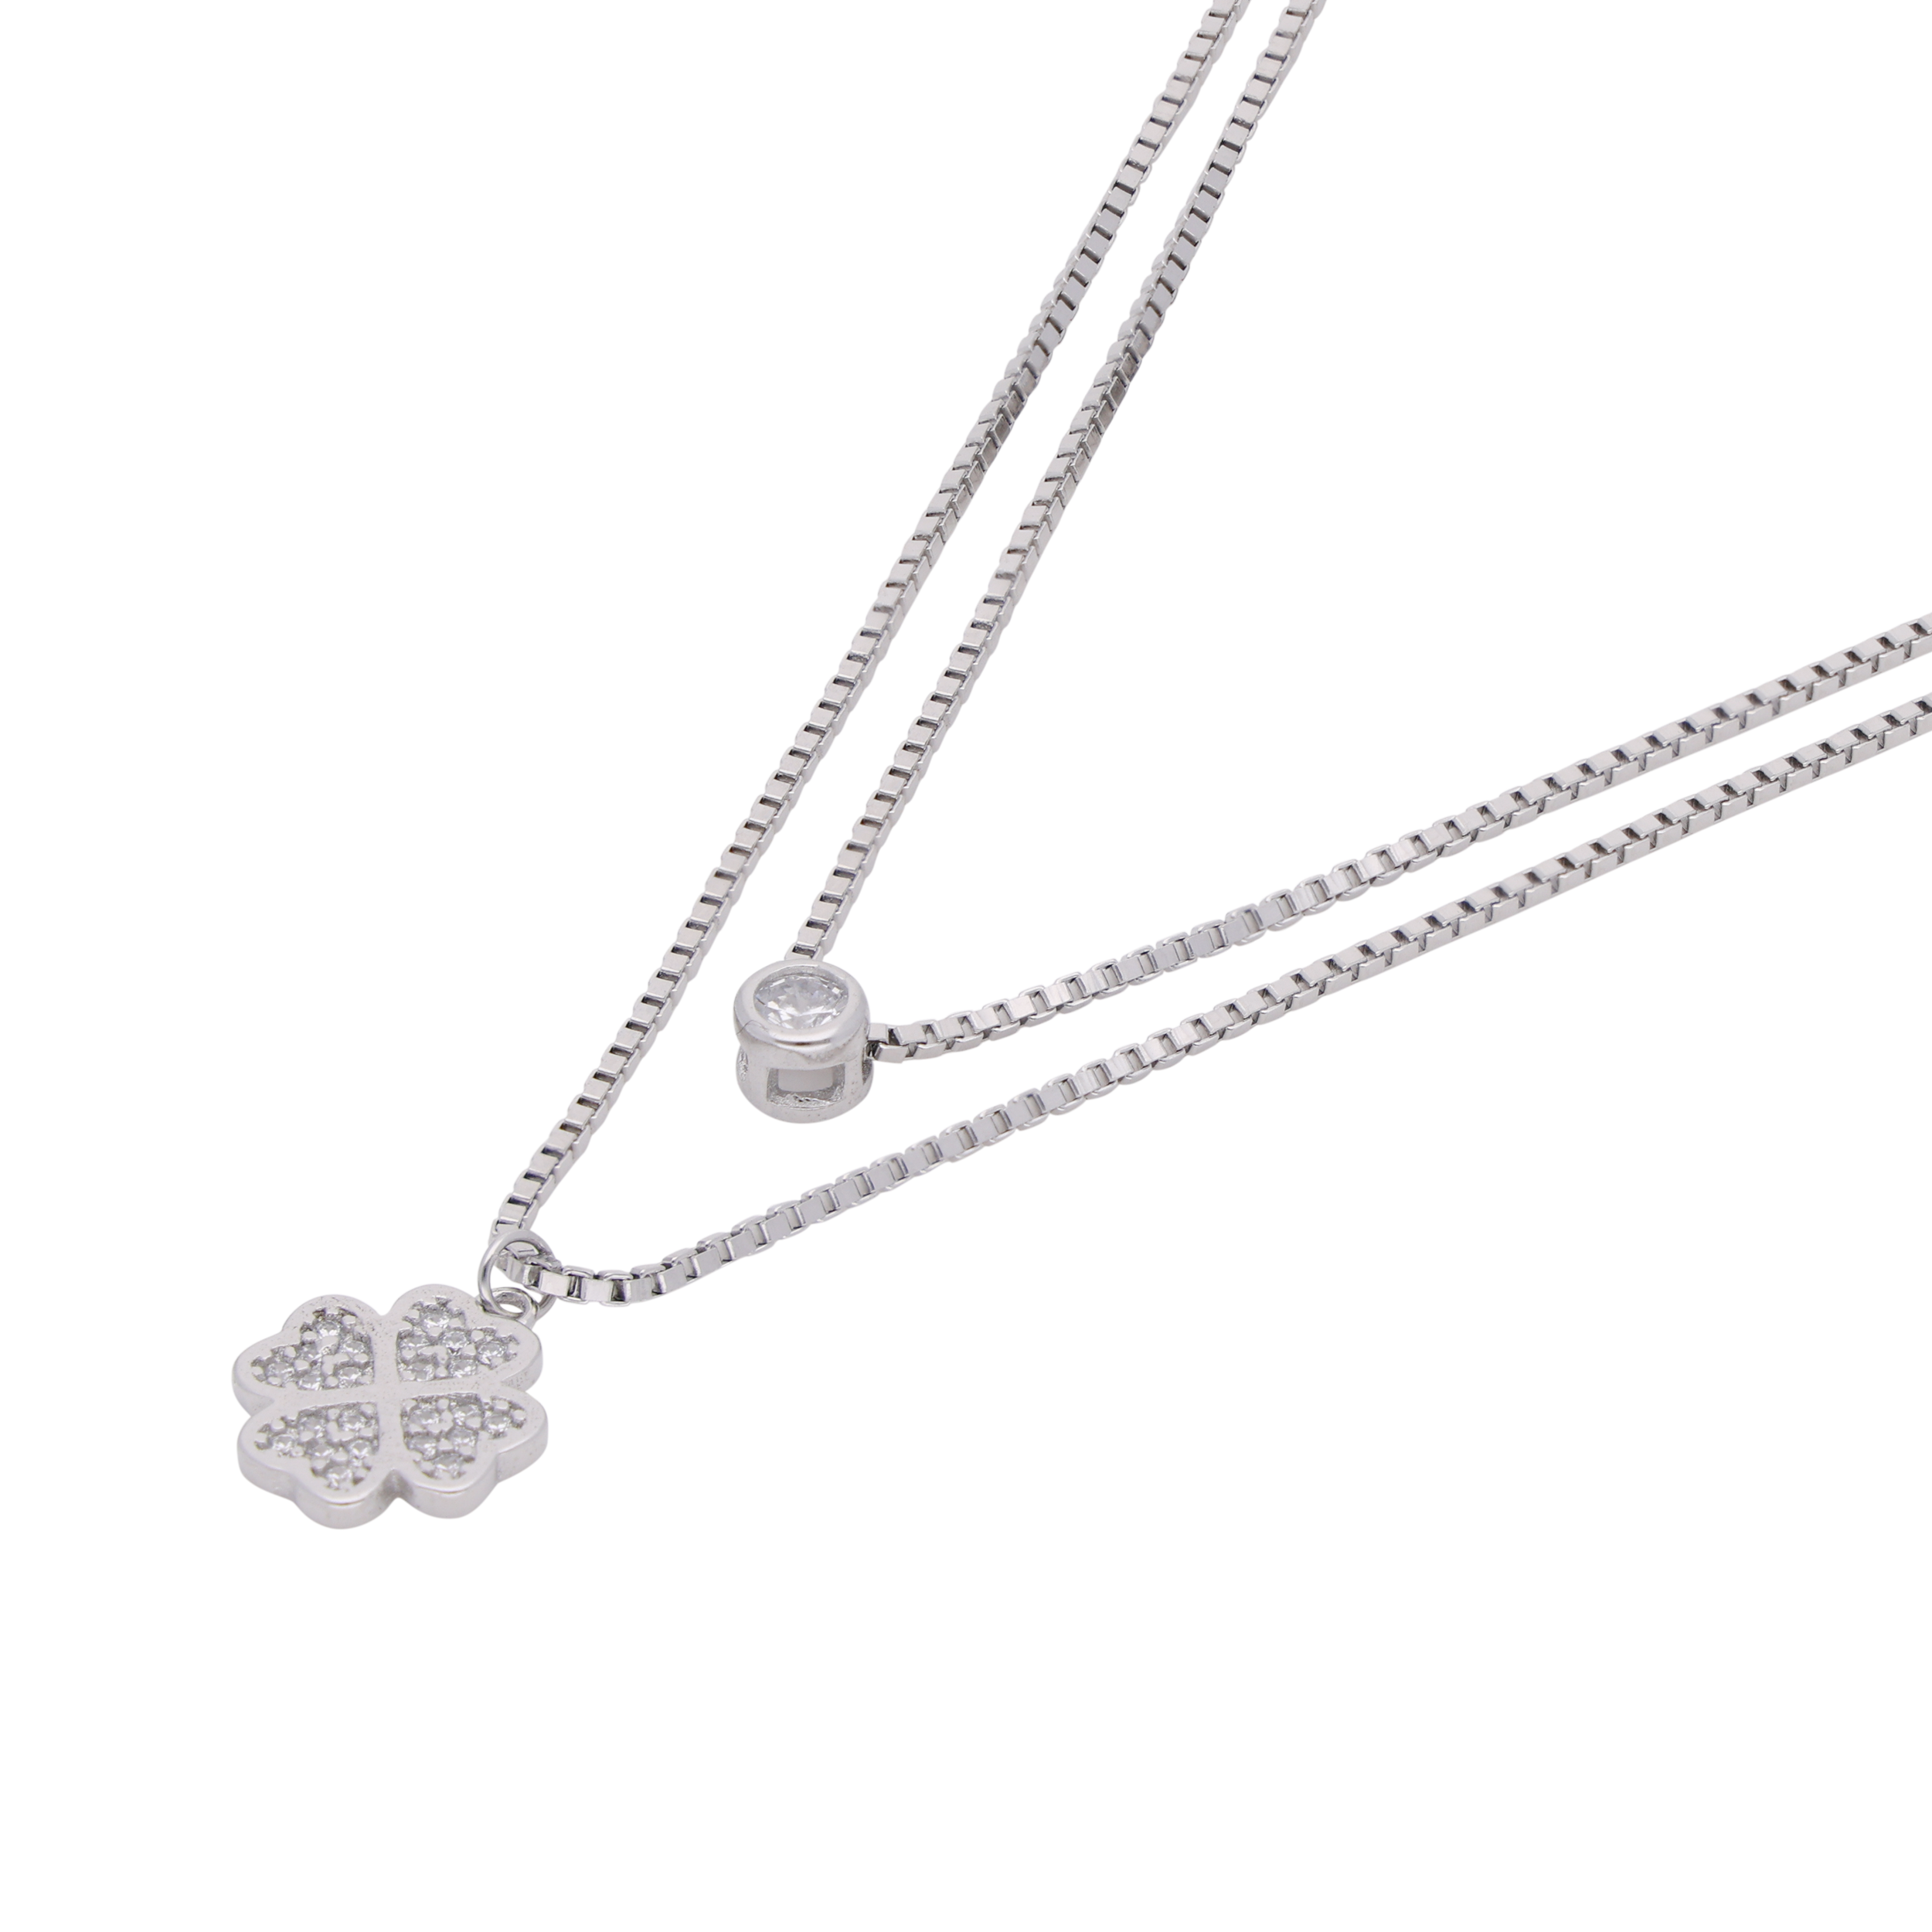 "Floral Harmony: Layered Silver Chain with Flower Pendant" | SKU: 0019281841